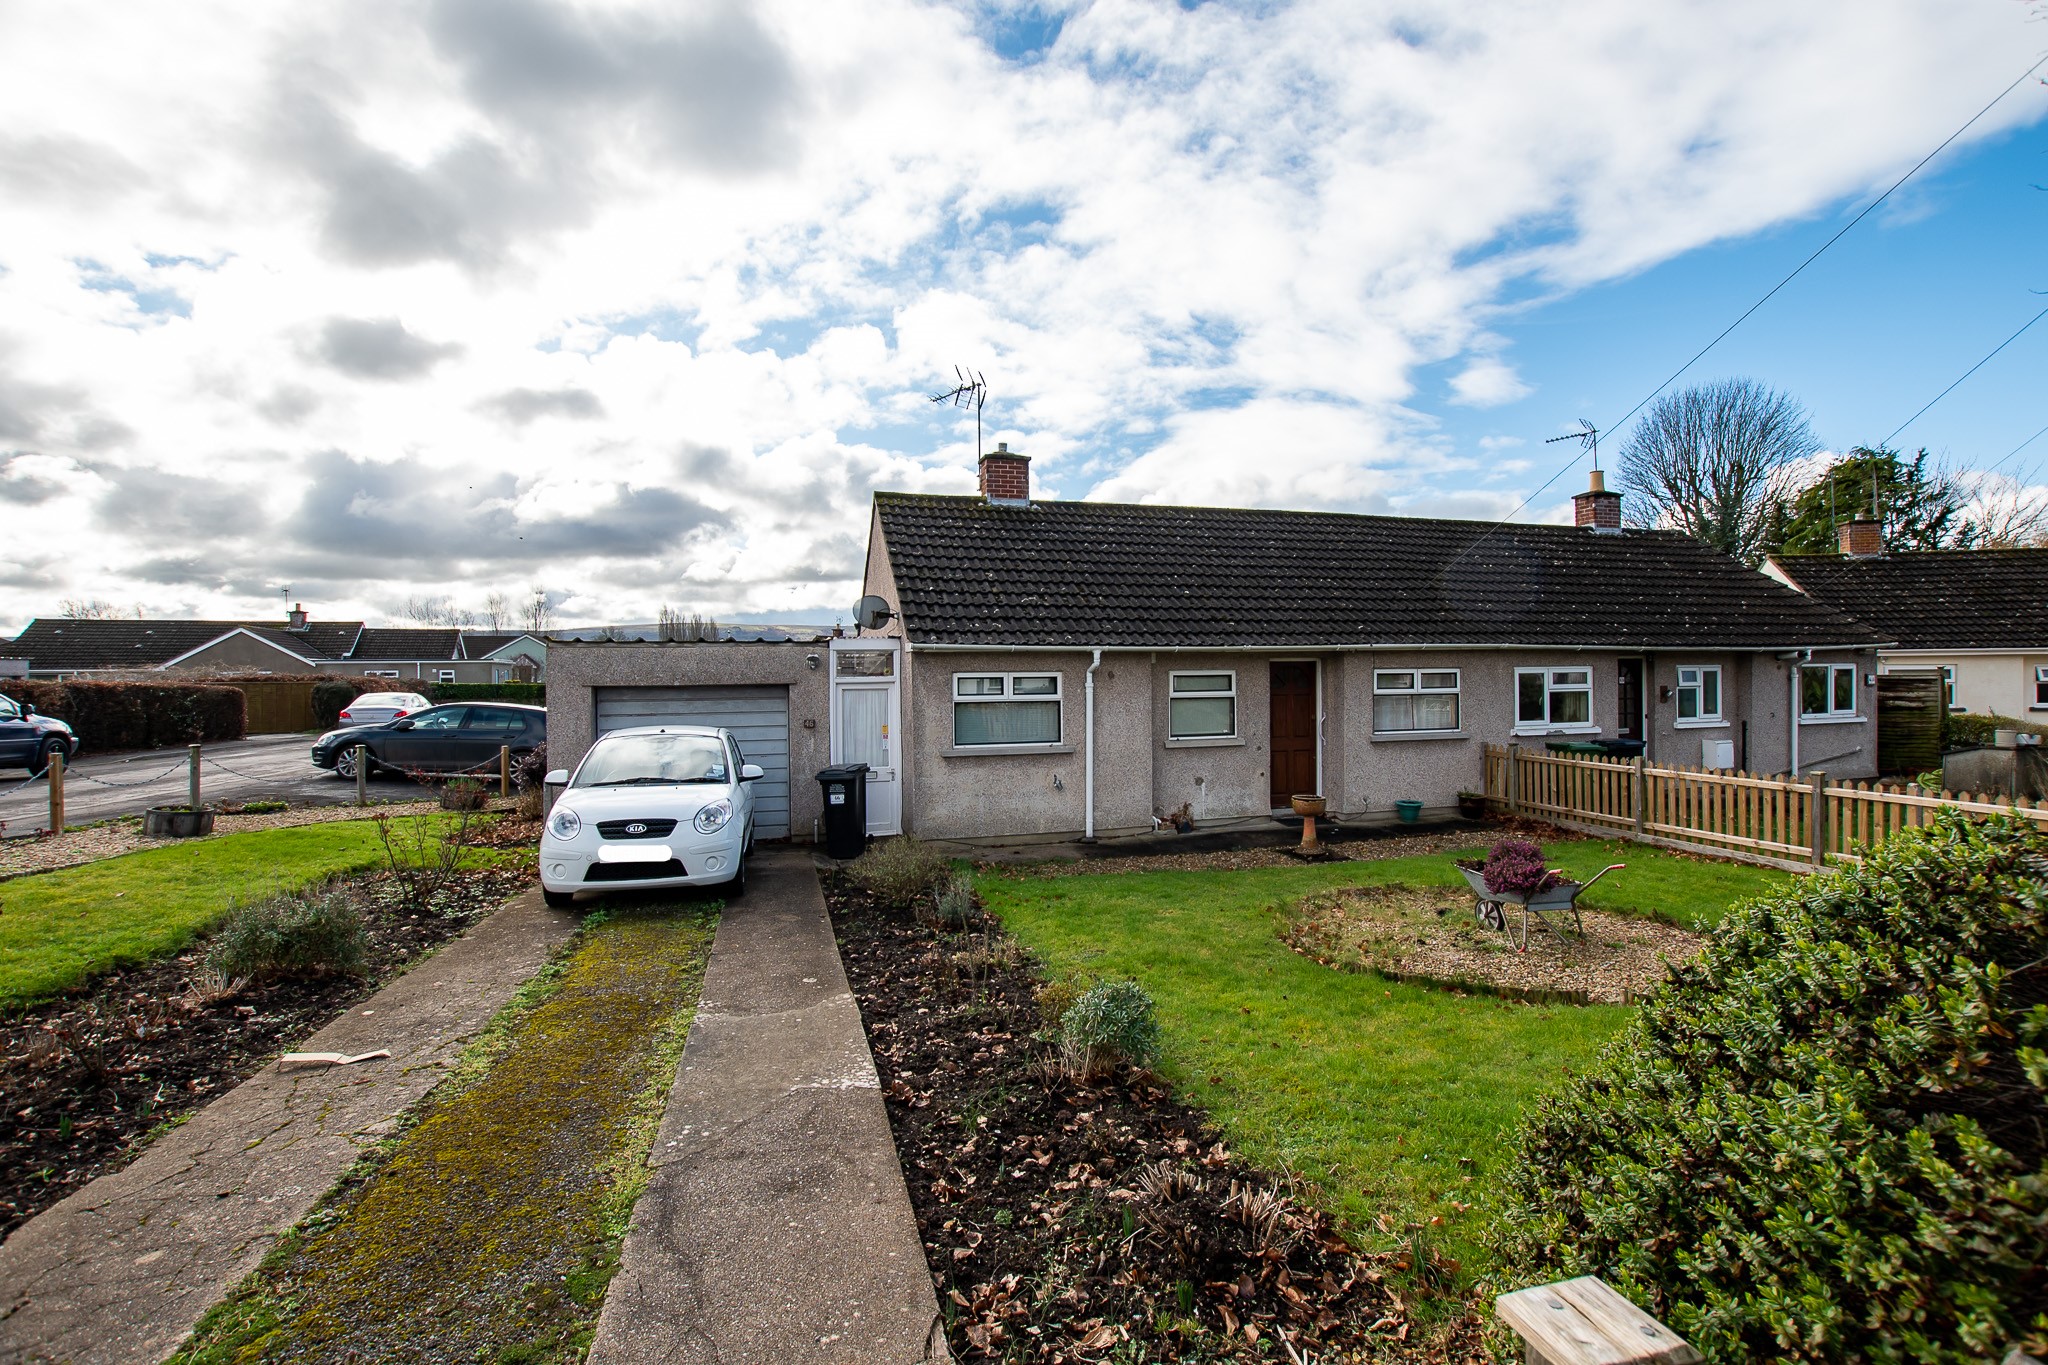 South Meadows, Wrington - well presented bungalow with large gardens and garage